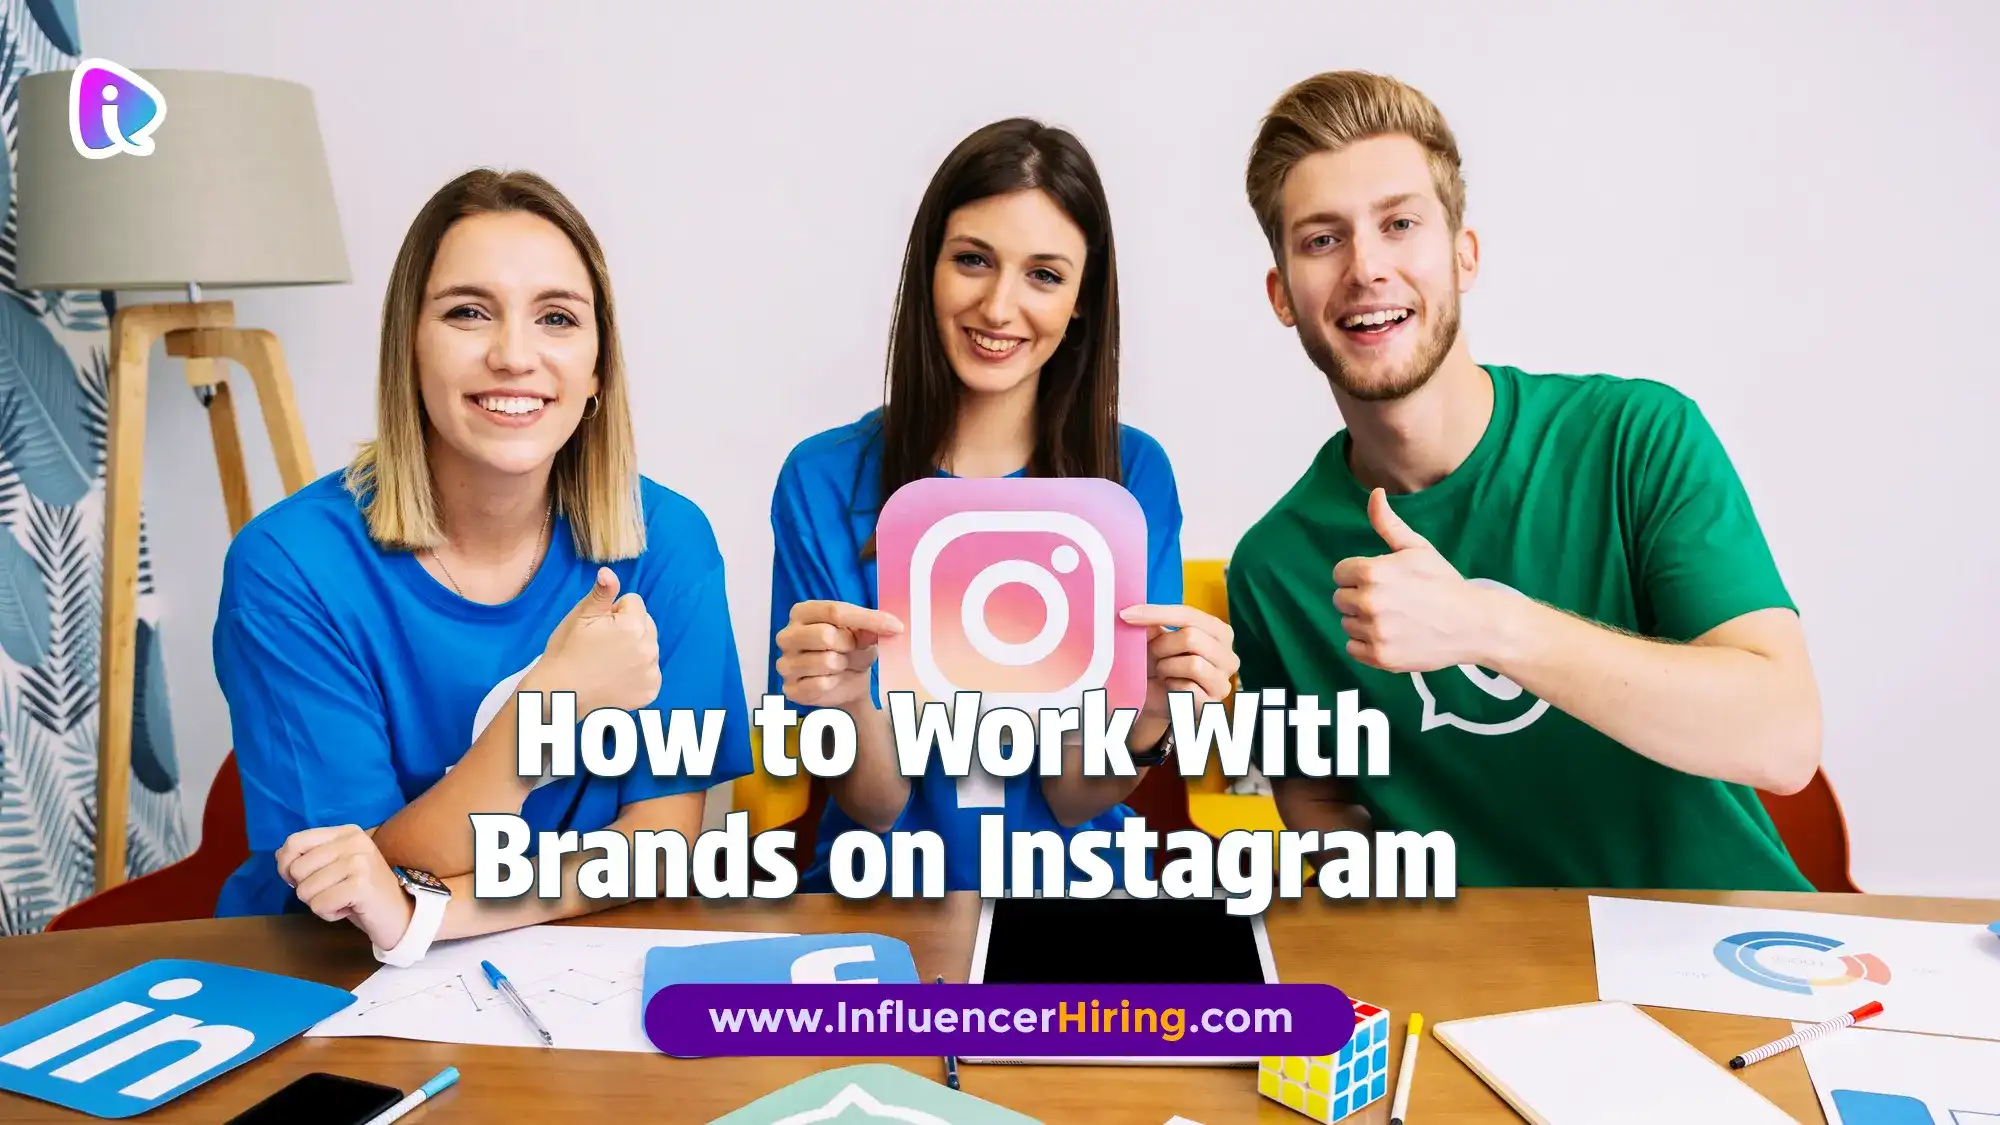 Influencer connecting with brand on Instagram